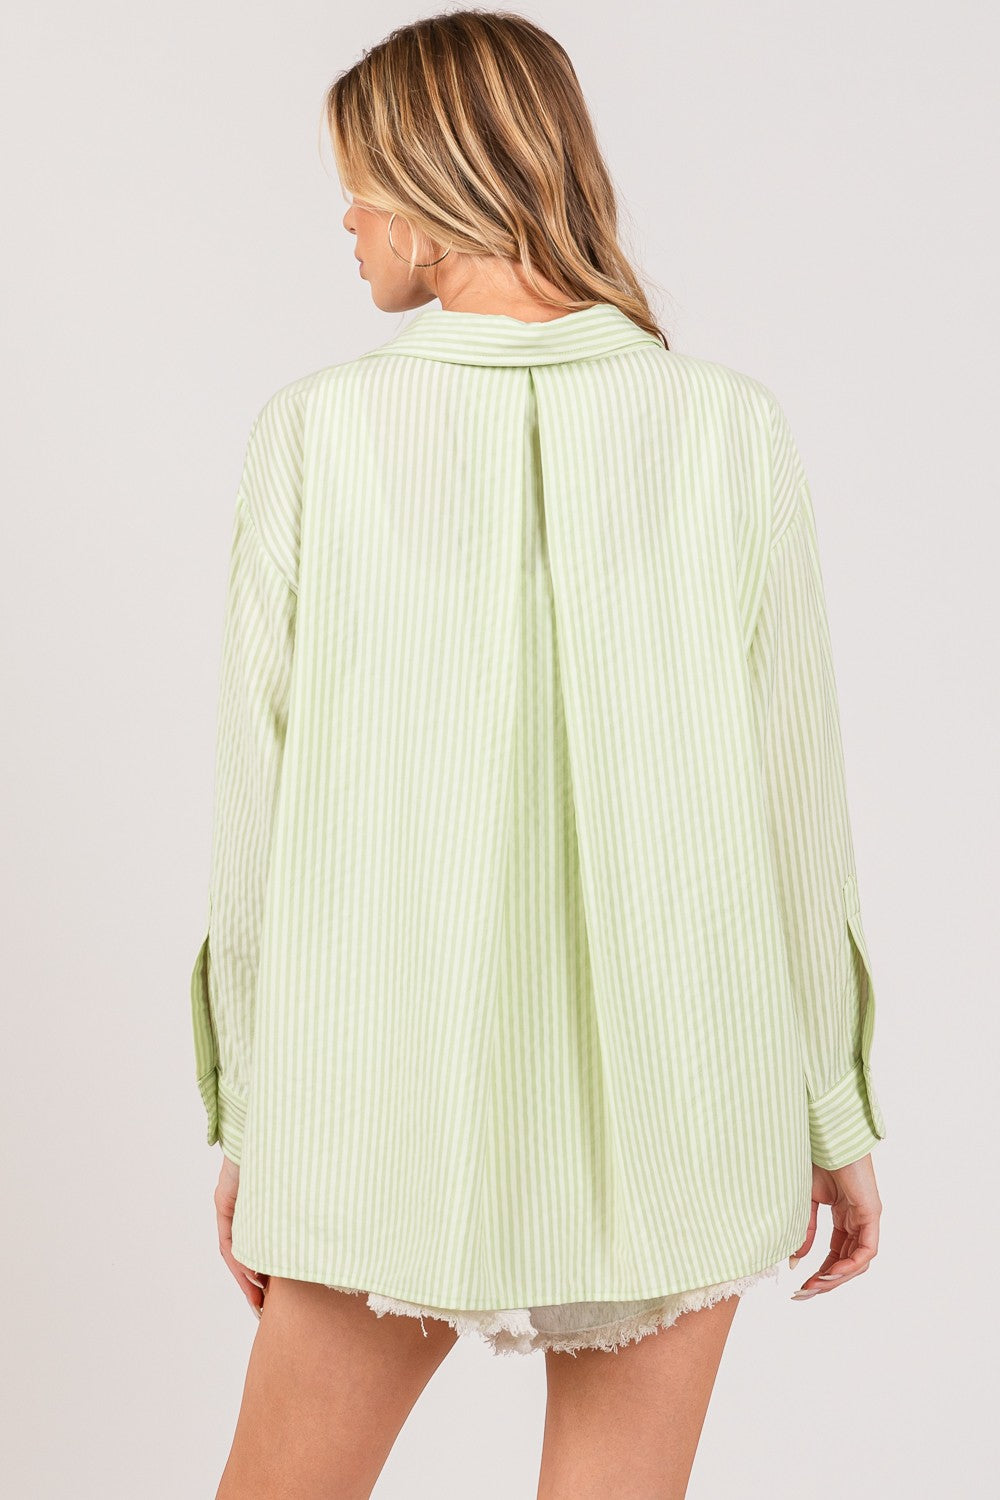 SAGE + FIG Striped Button Up Long Sleeve Shirt  | KIKI COUTURE